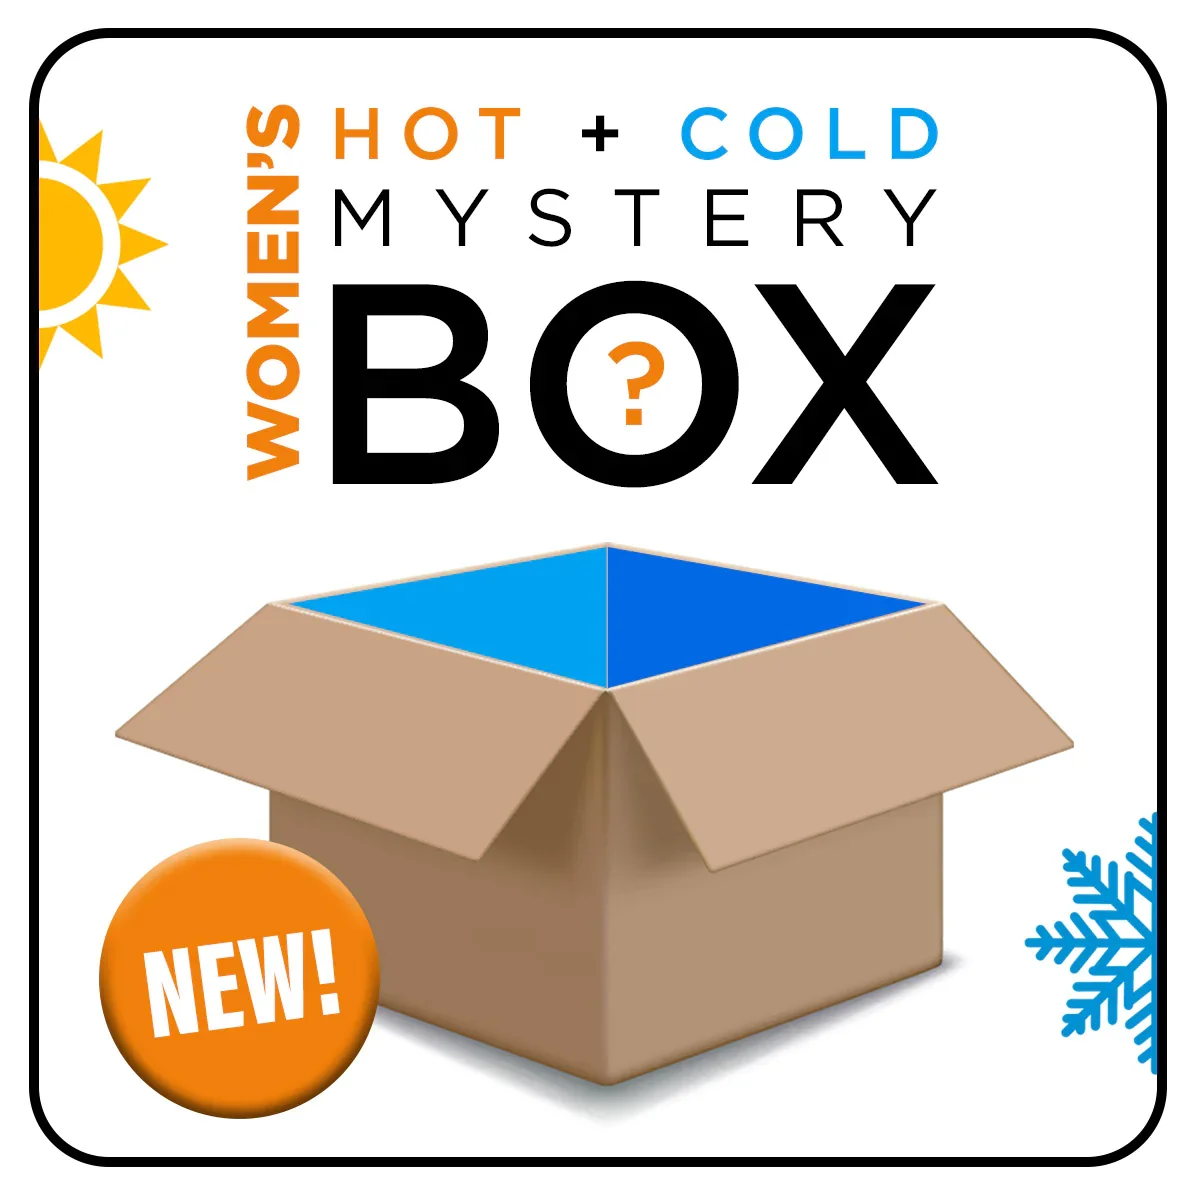 Image of Women's Mystery Box: Hot + Cold